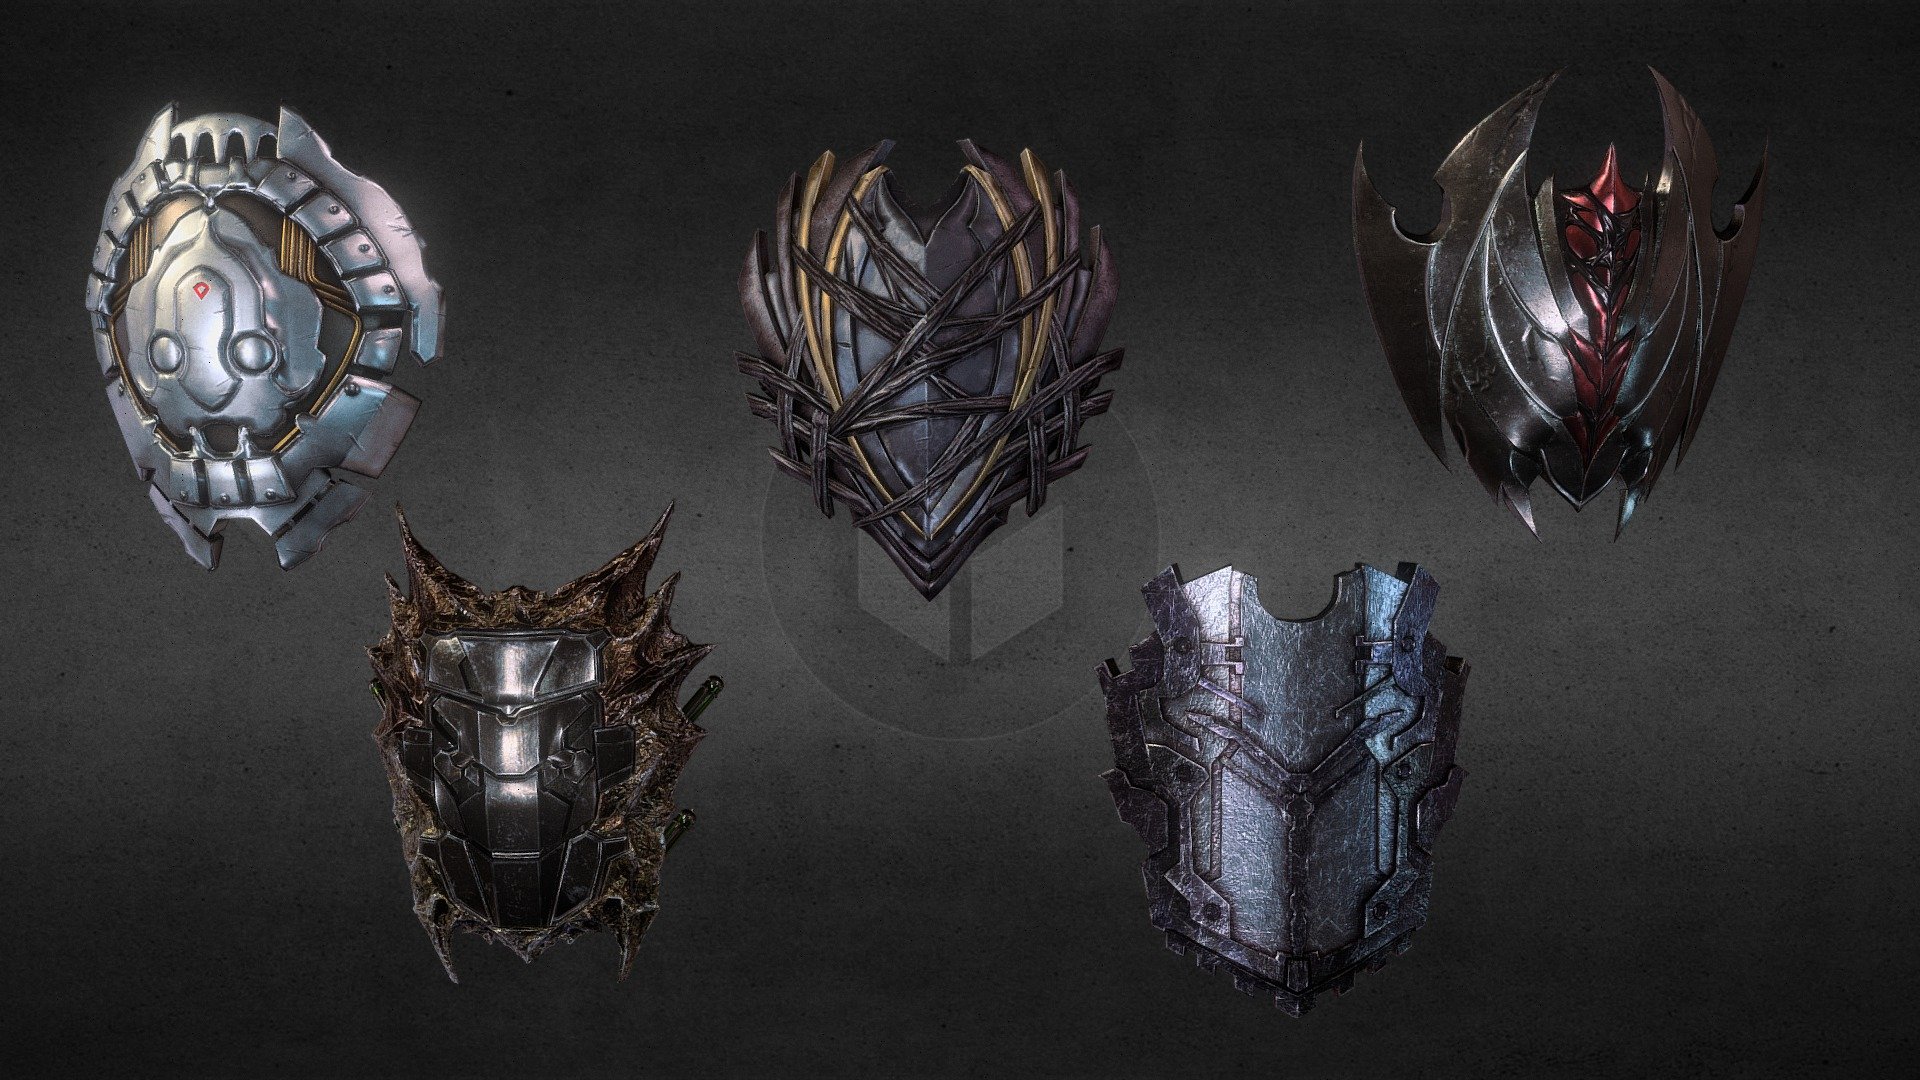 Weapons Models For Game with Textures - MMORPG Inspired Shields Models - 3D model by CG_Crew 3d model